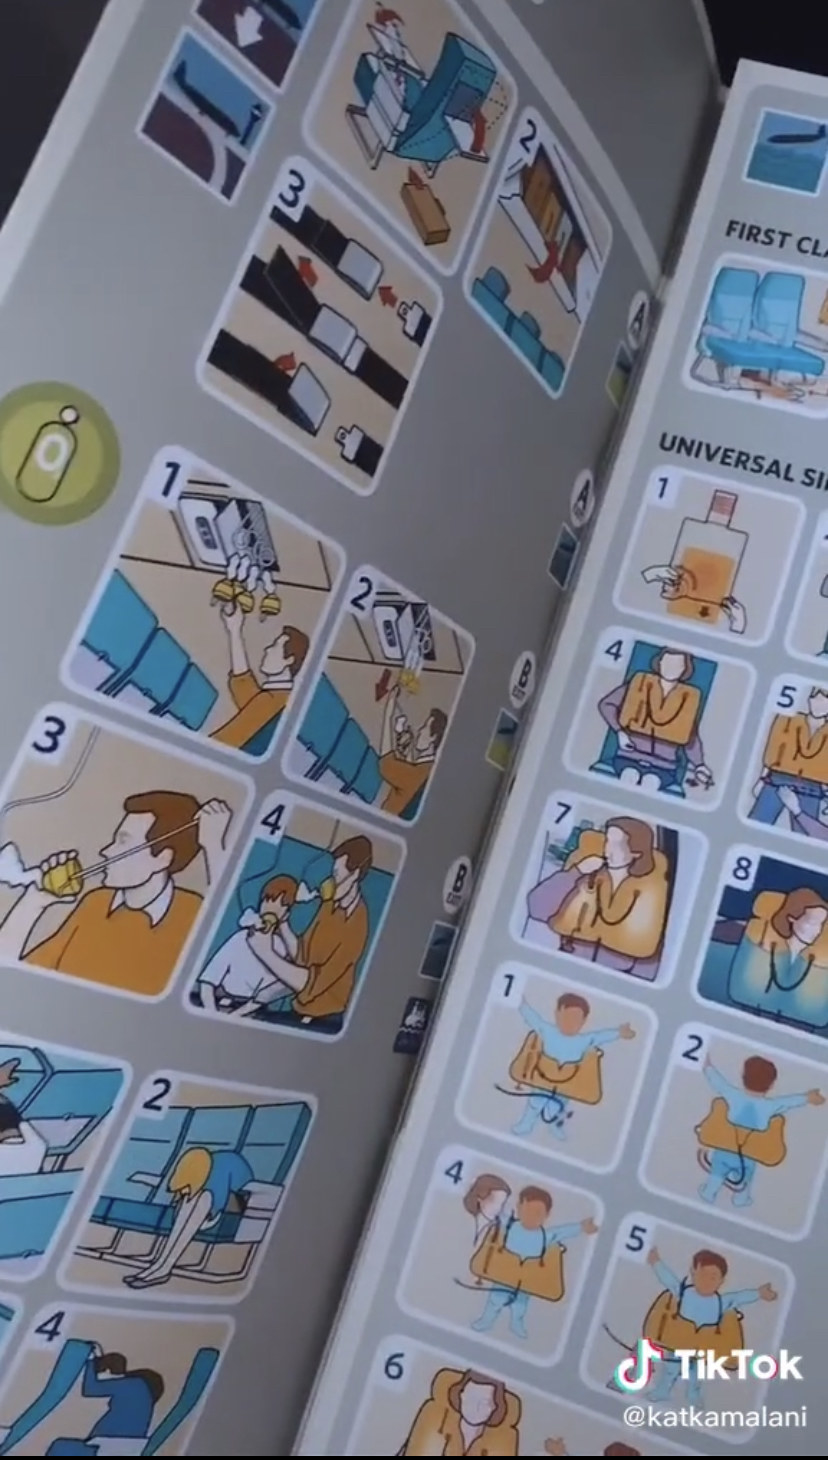 An airplane safety manual